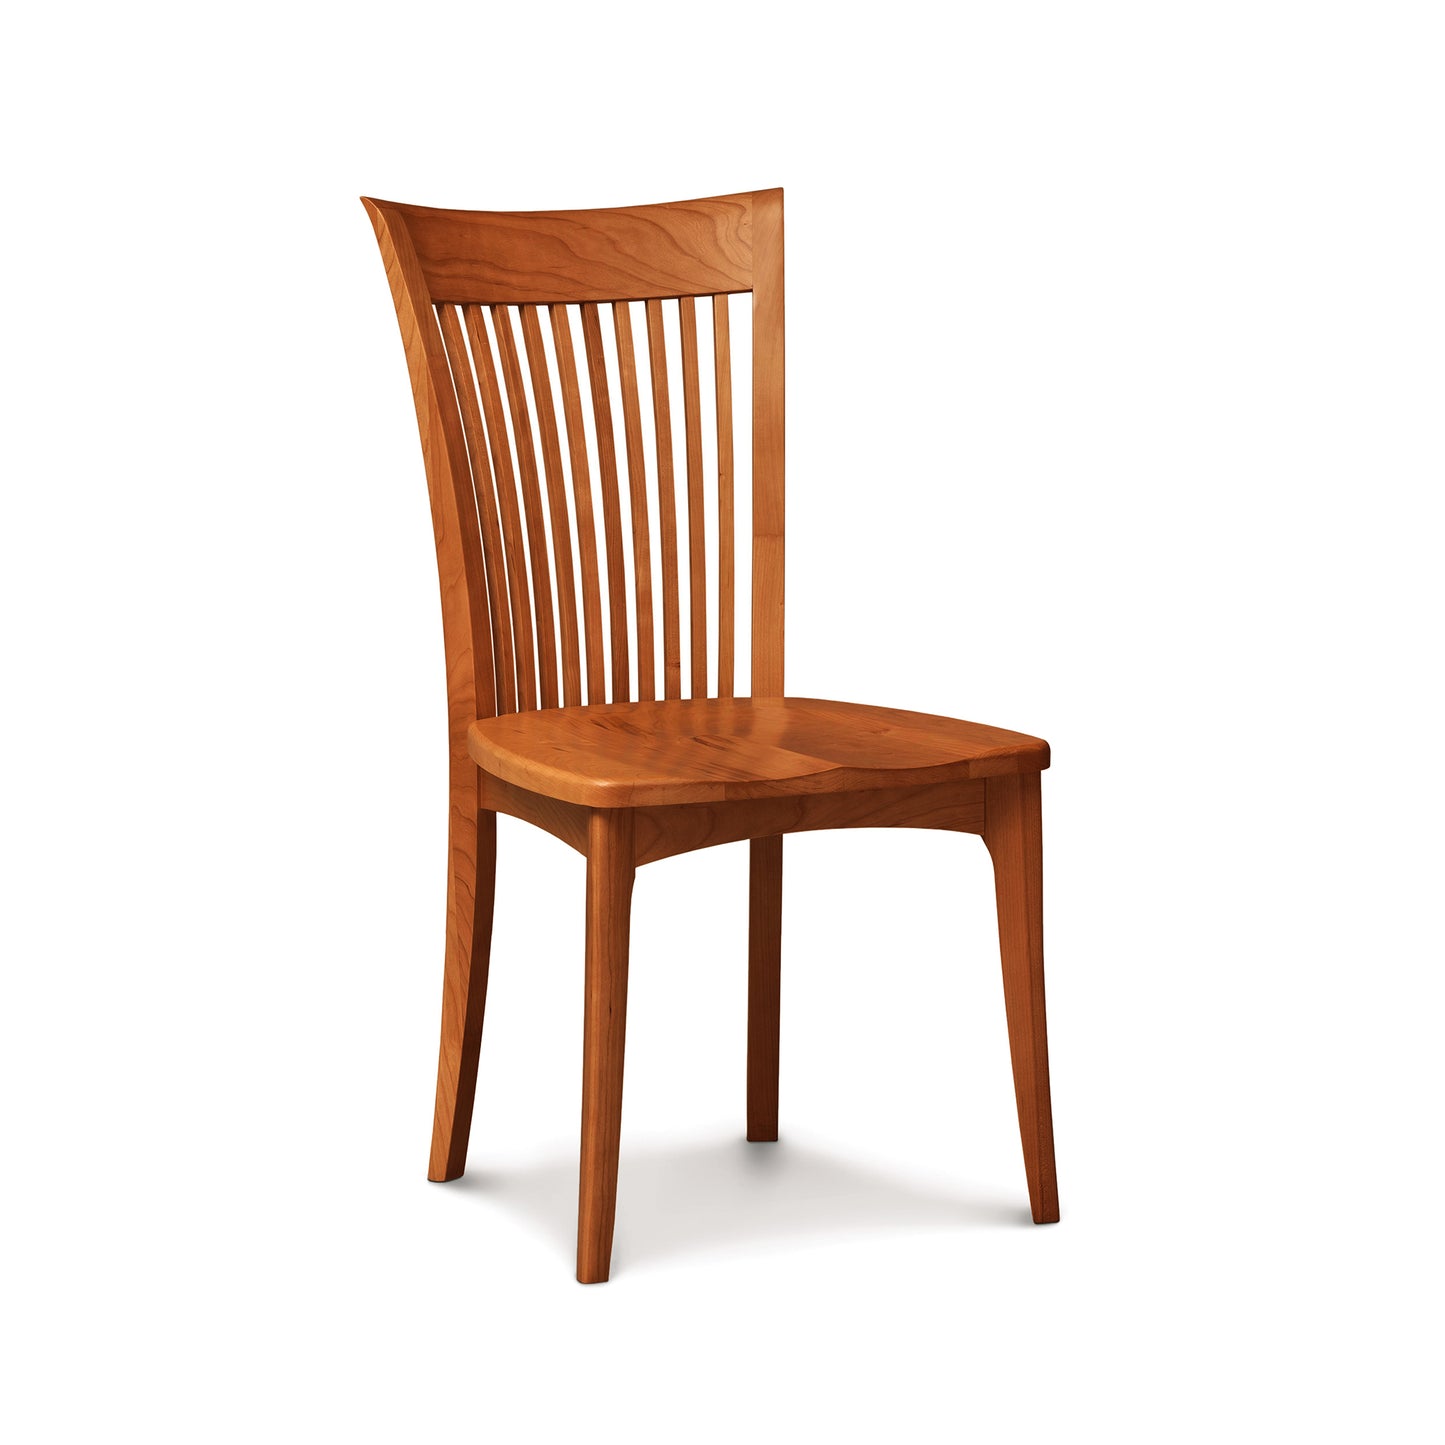 A Sarah Shaker Cherry Chair with Wooden Seat by Copeland Furniture with a tall, slatted backrest stands isolated against a white background.